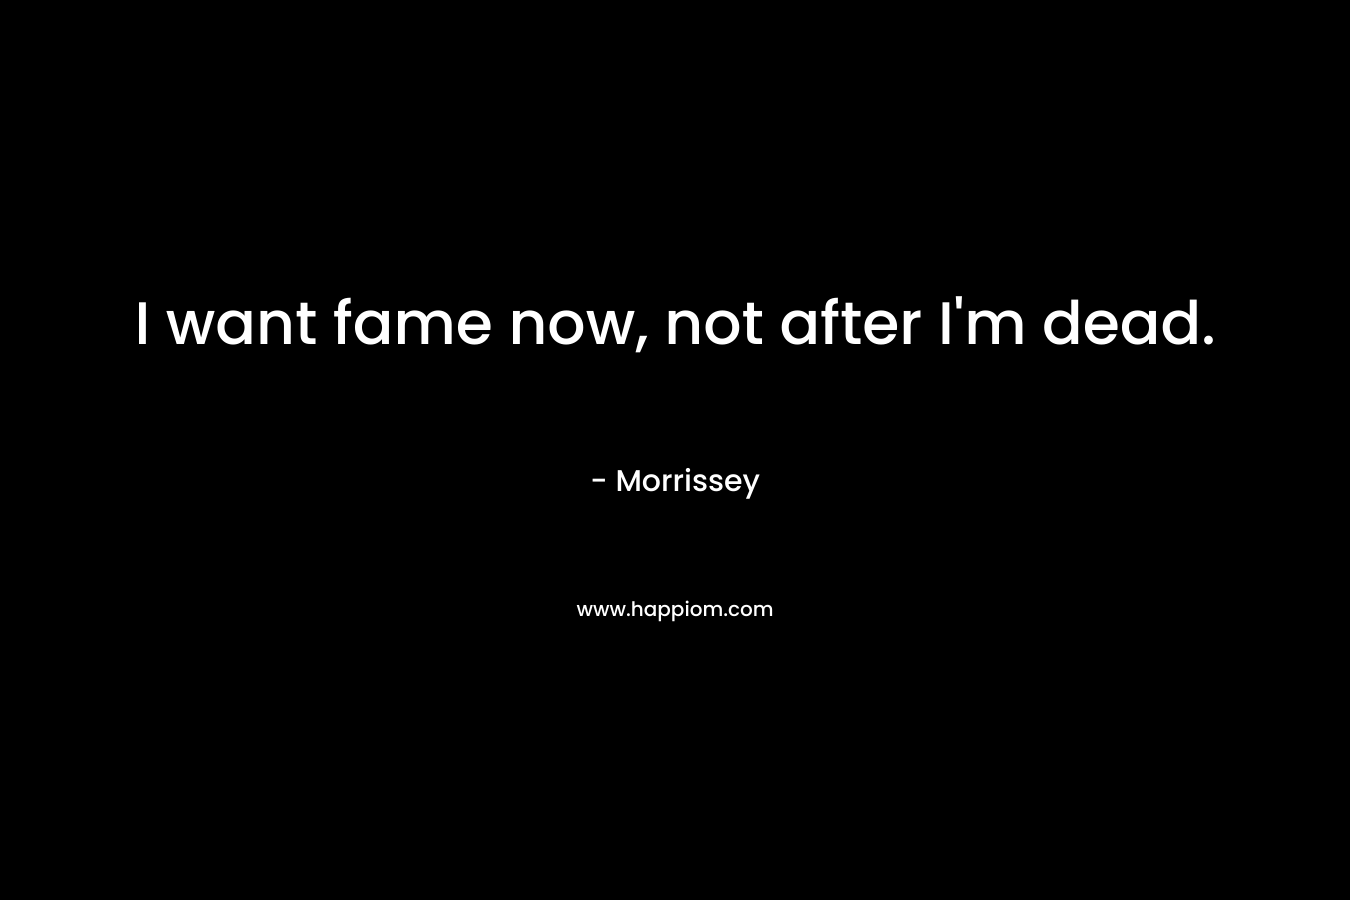 I want fame now, not after I’m dead. – Morrissey